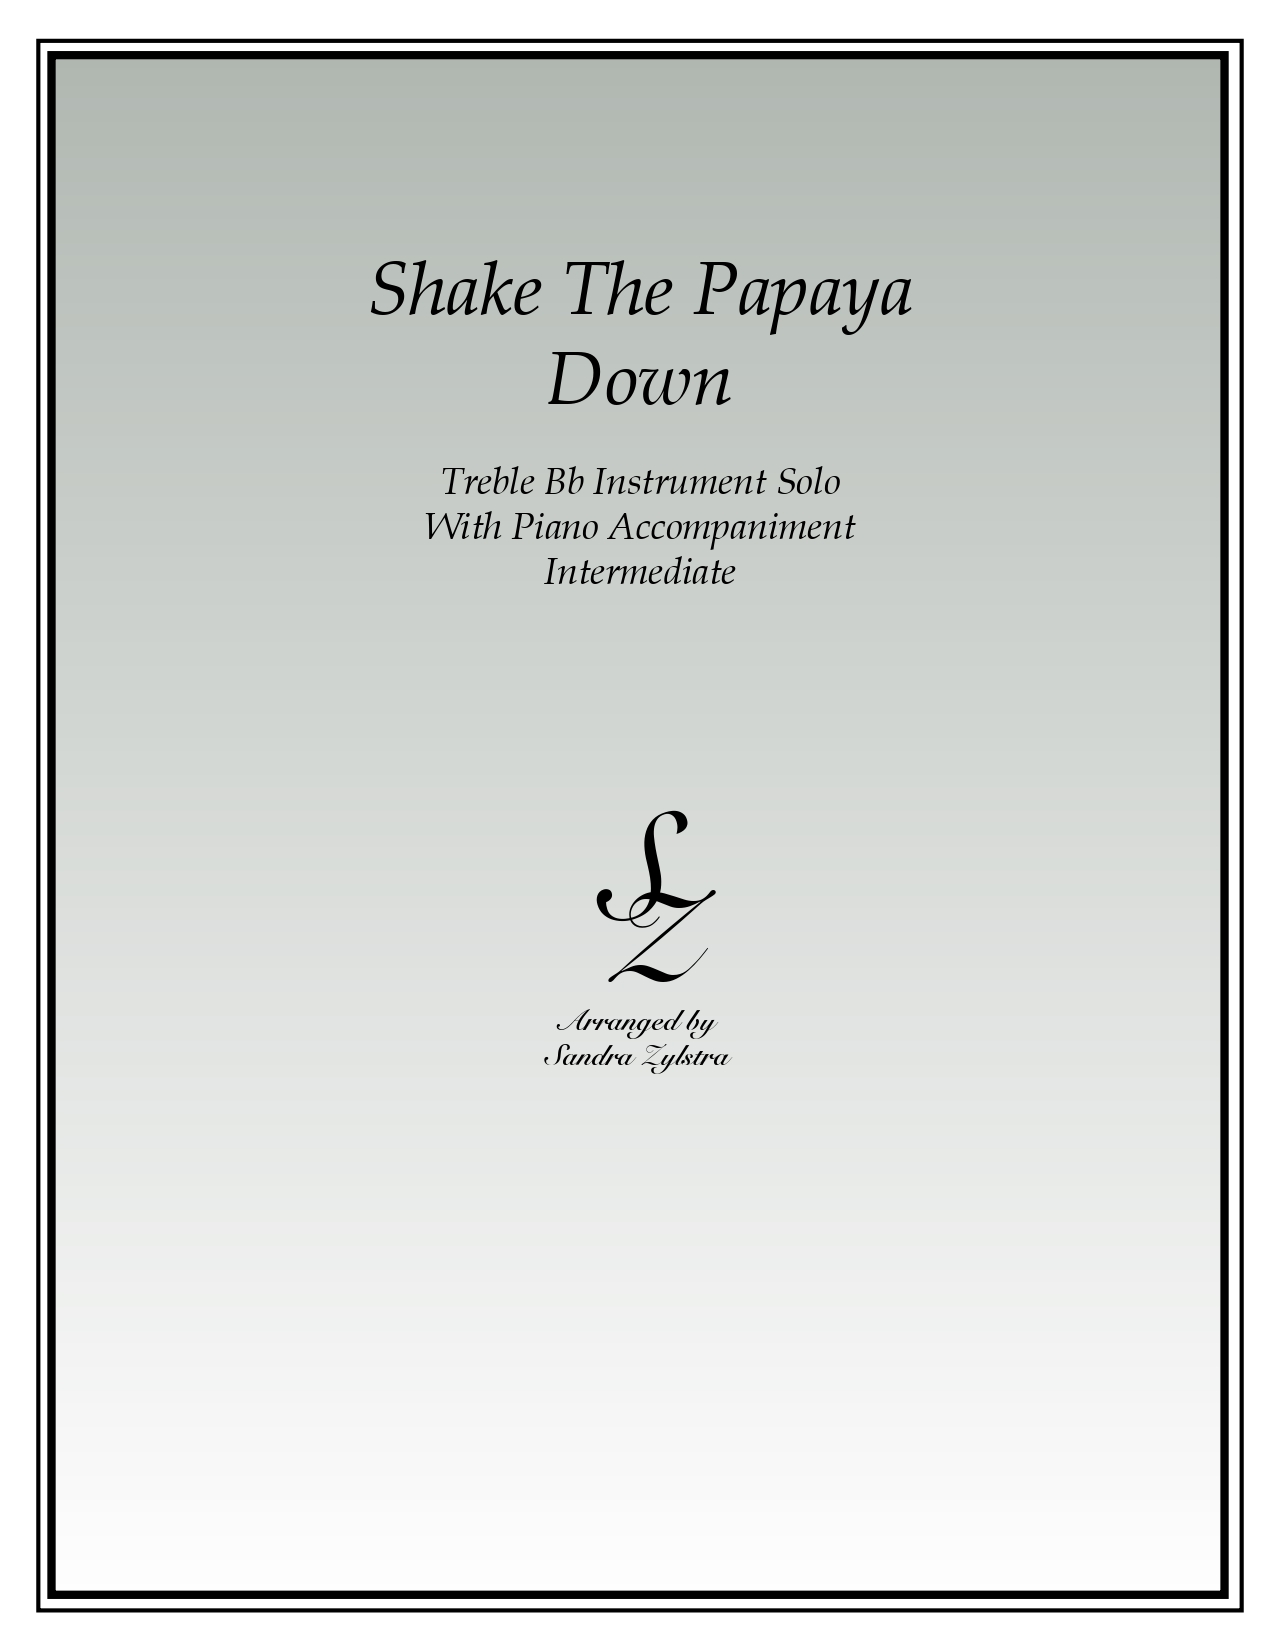 Shake The Papaya Down Bb instrument solo part cover page 00011